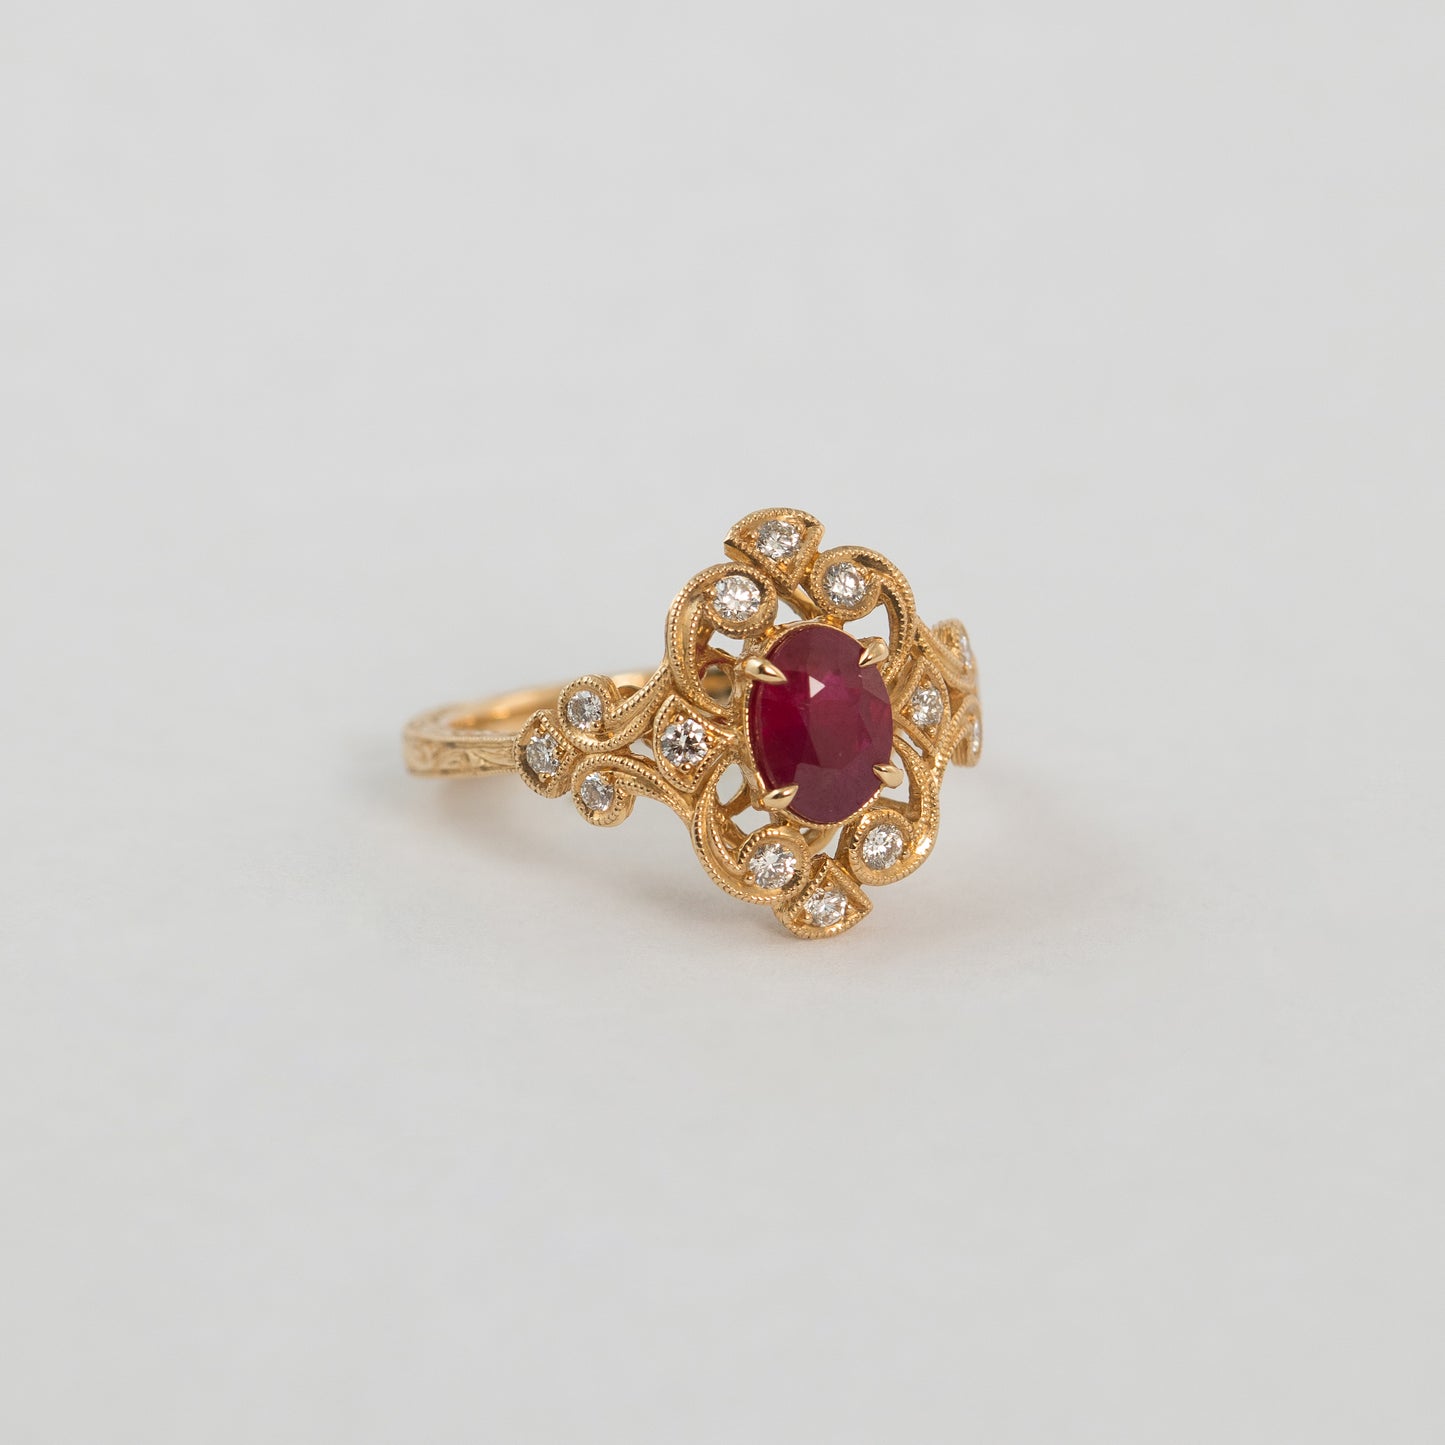 The New Victorian Ruby Ring